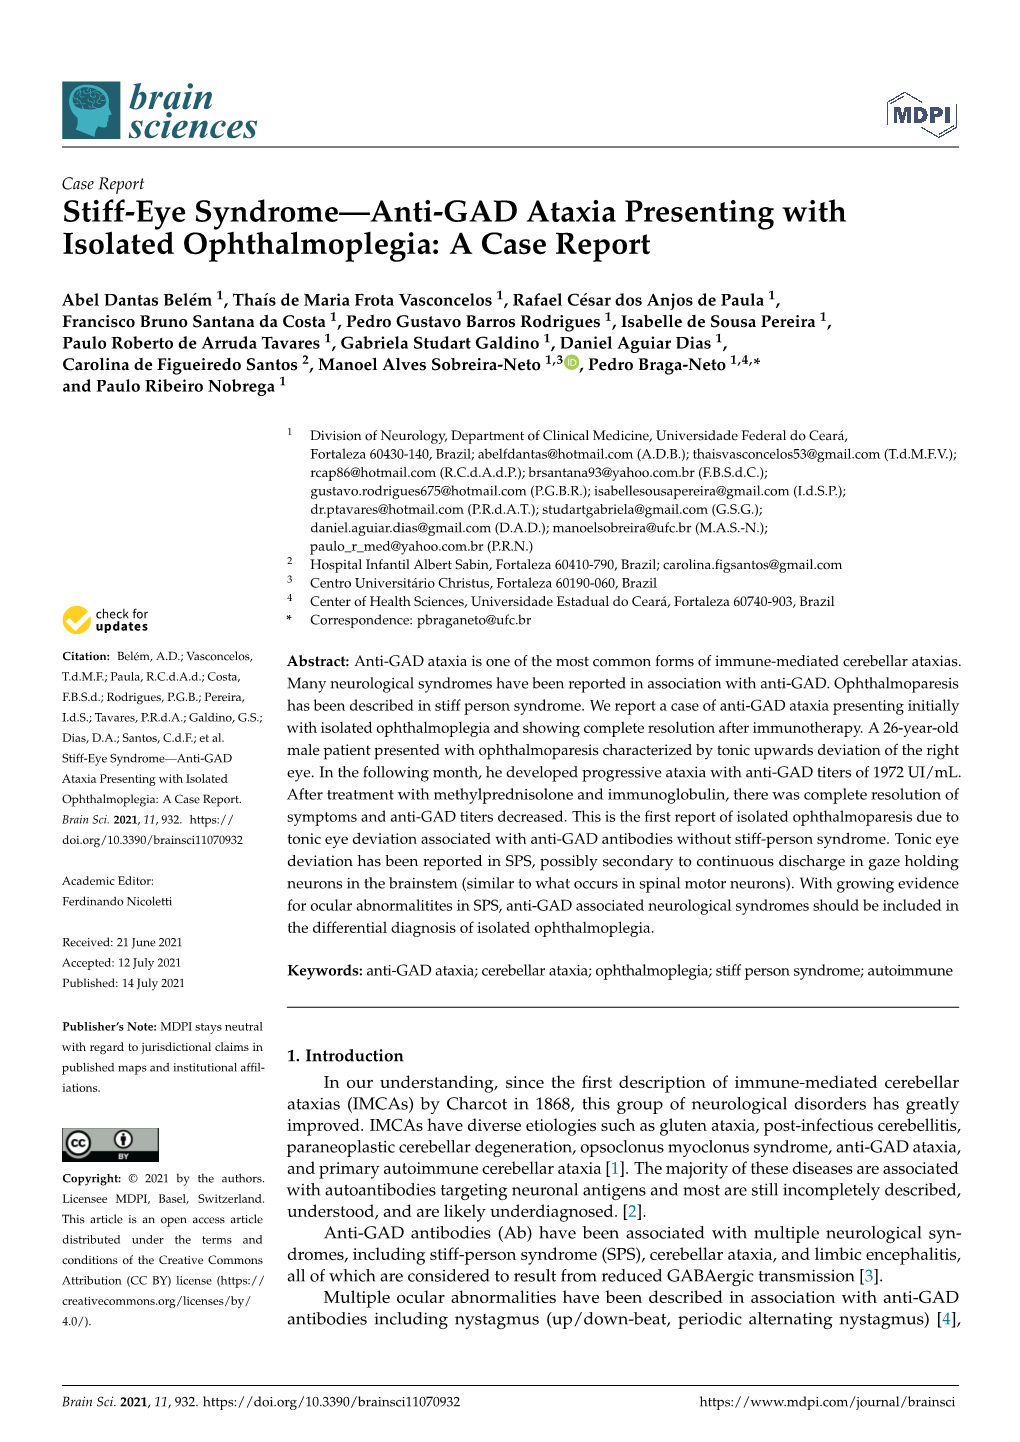 Stiff-Eye Syndrome—Anti-GAD Ataxia Presenting with Isolated Ophthalmoplegia: a Case Report